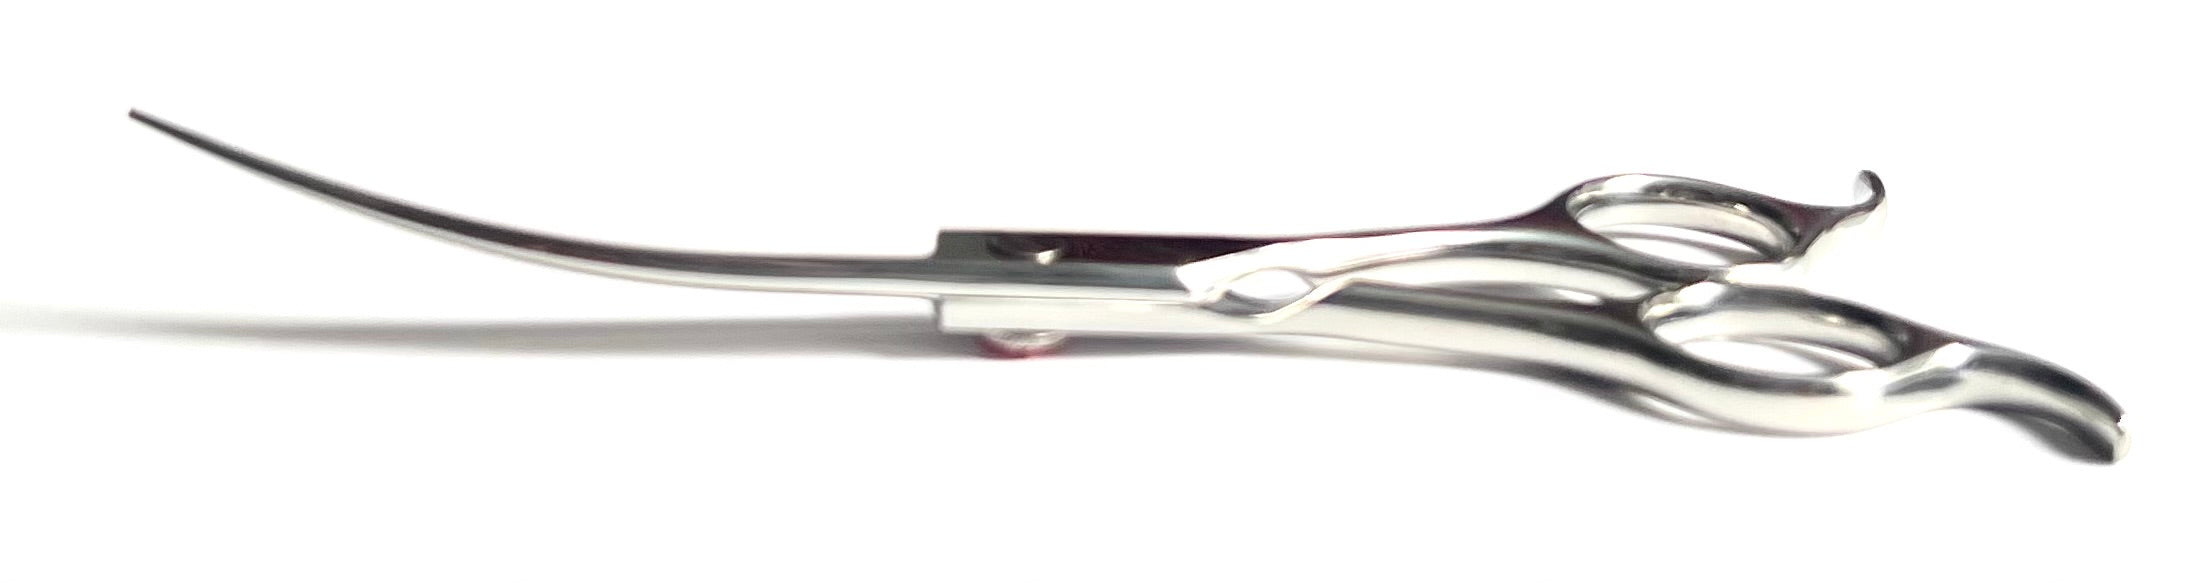 6.5" reversible curved dog grooming scissor-curved scissor by Abbfabb Grooming Scissors 